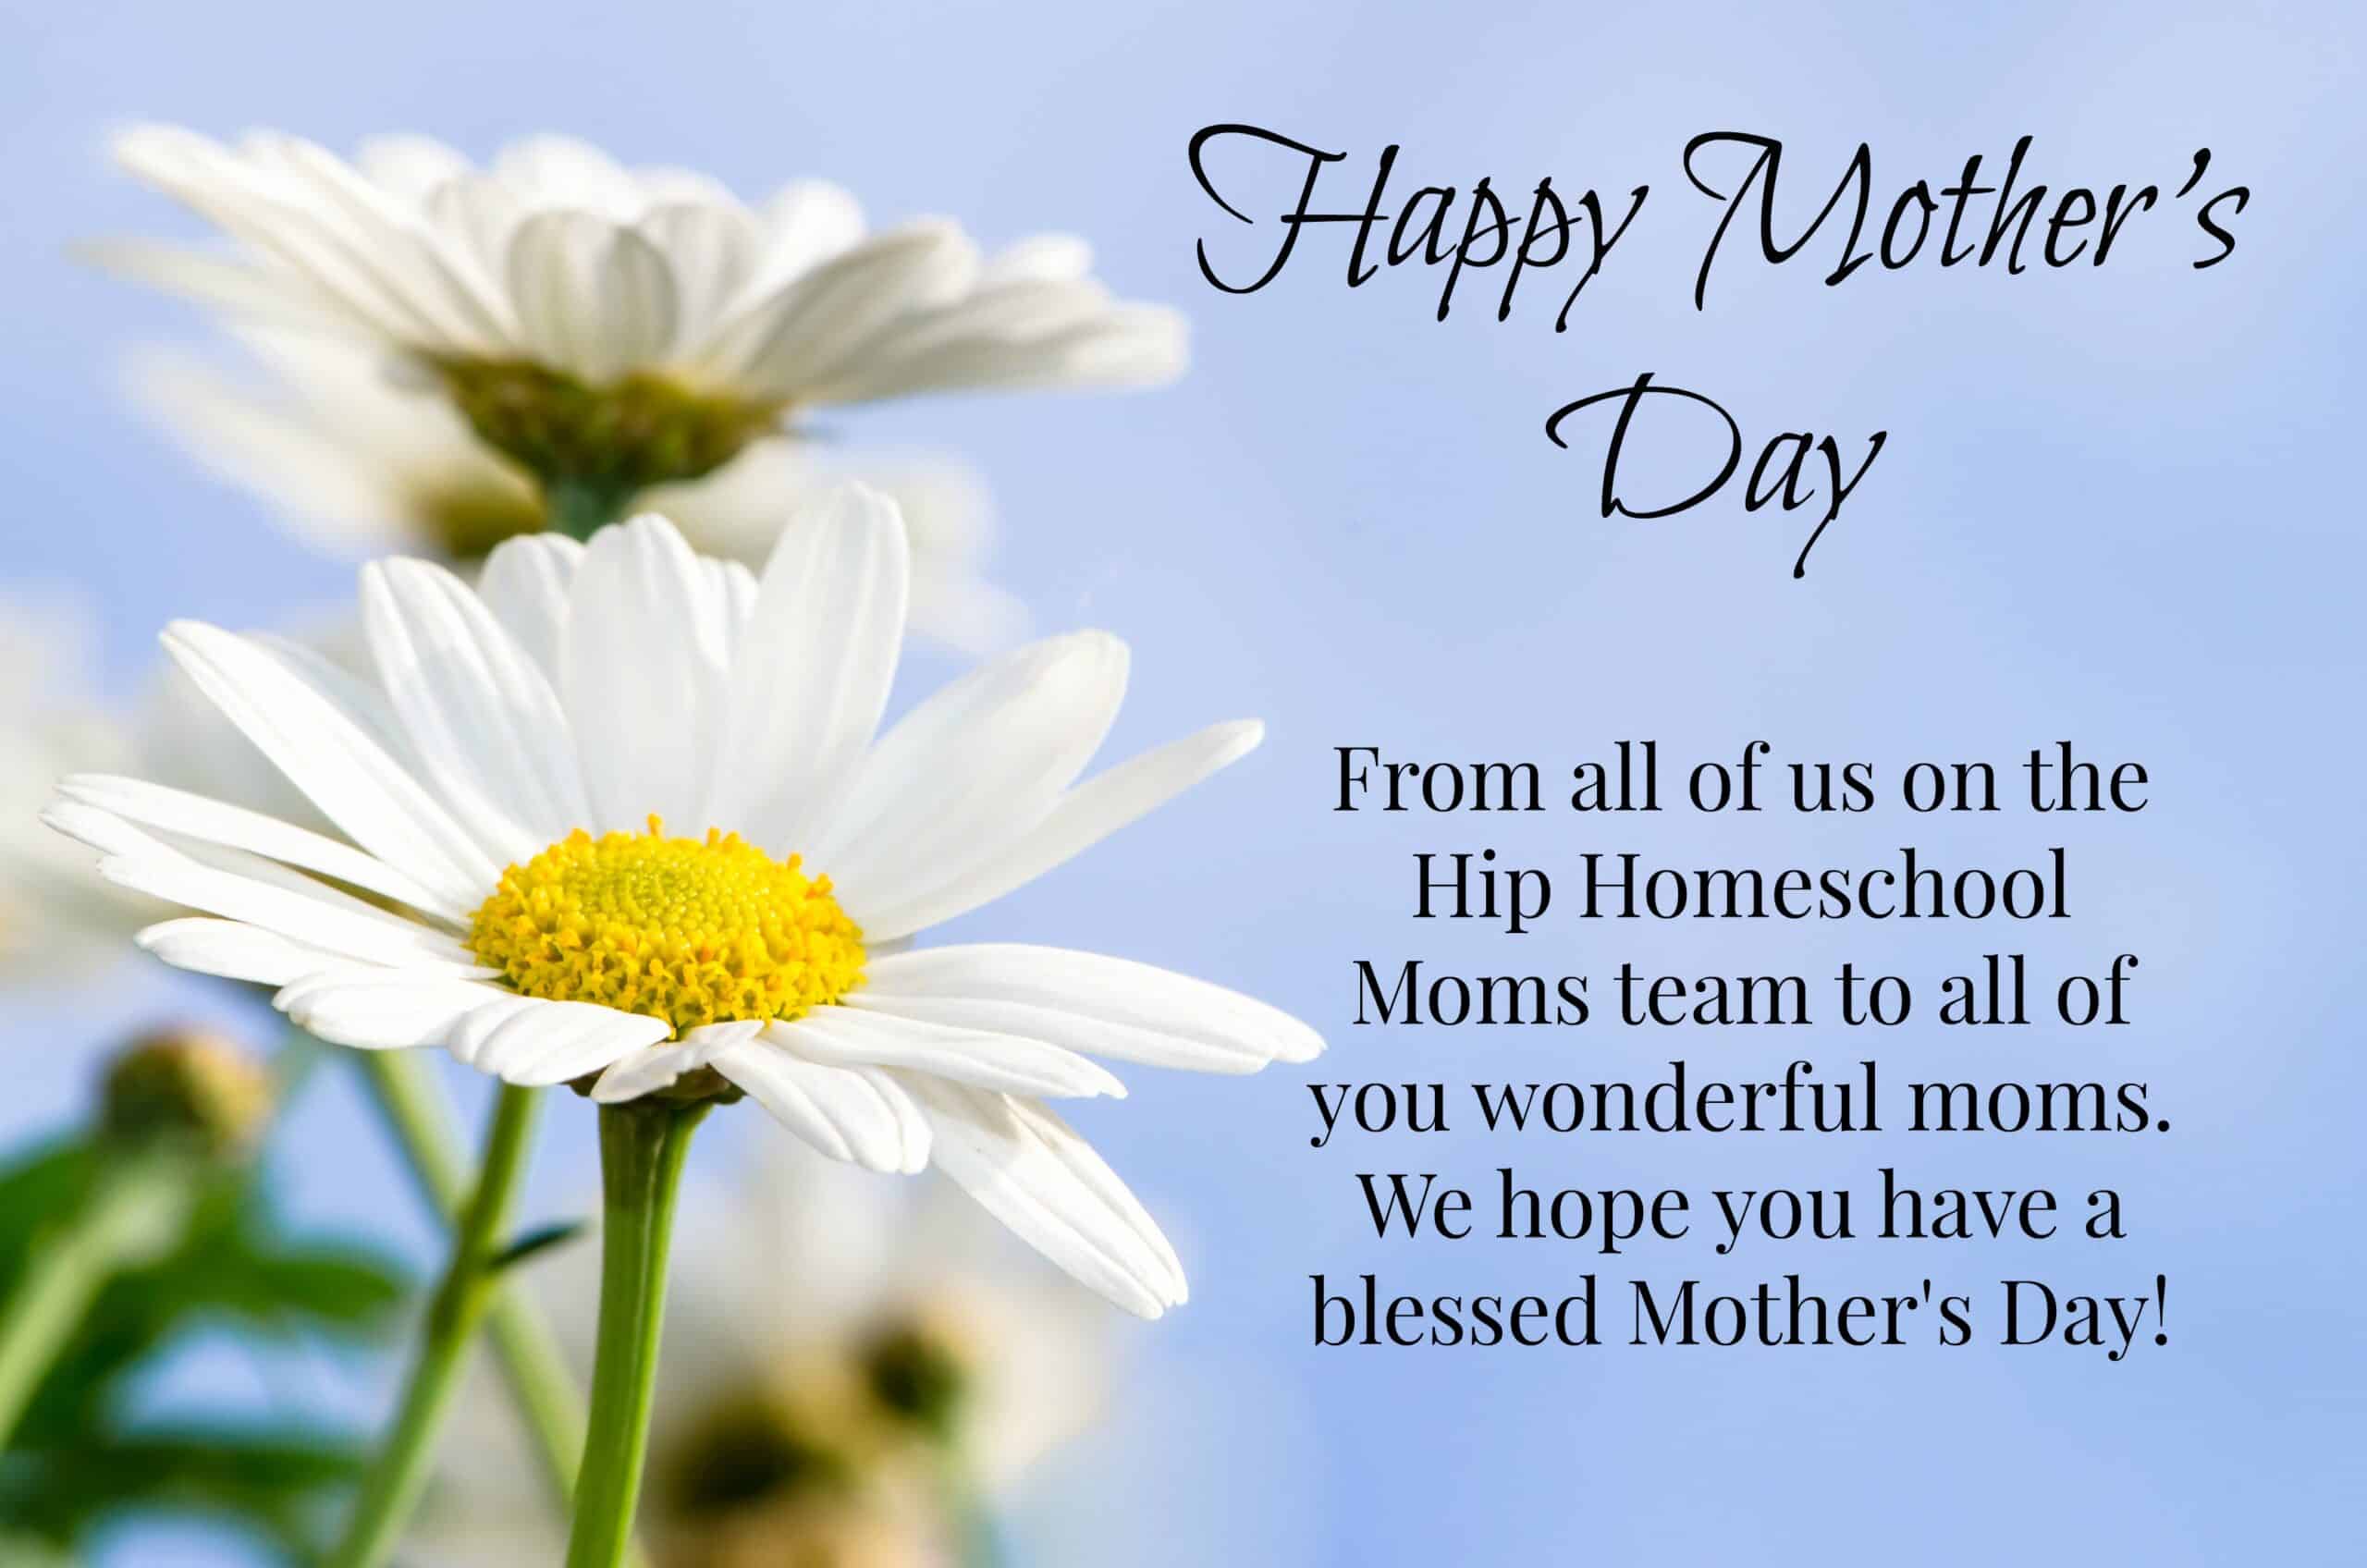 Happy Mother’s Day from Hip Homeschool Moms!